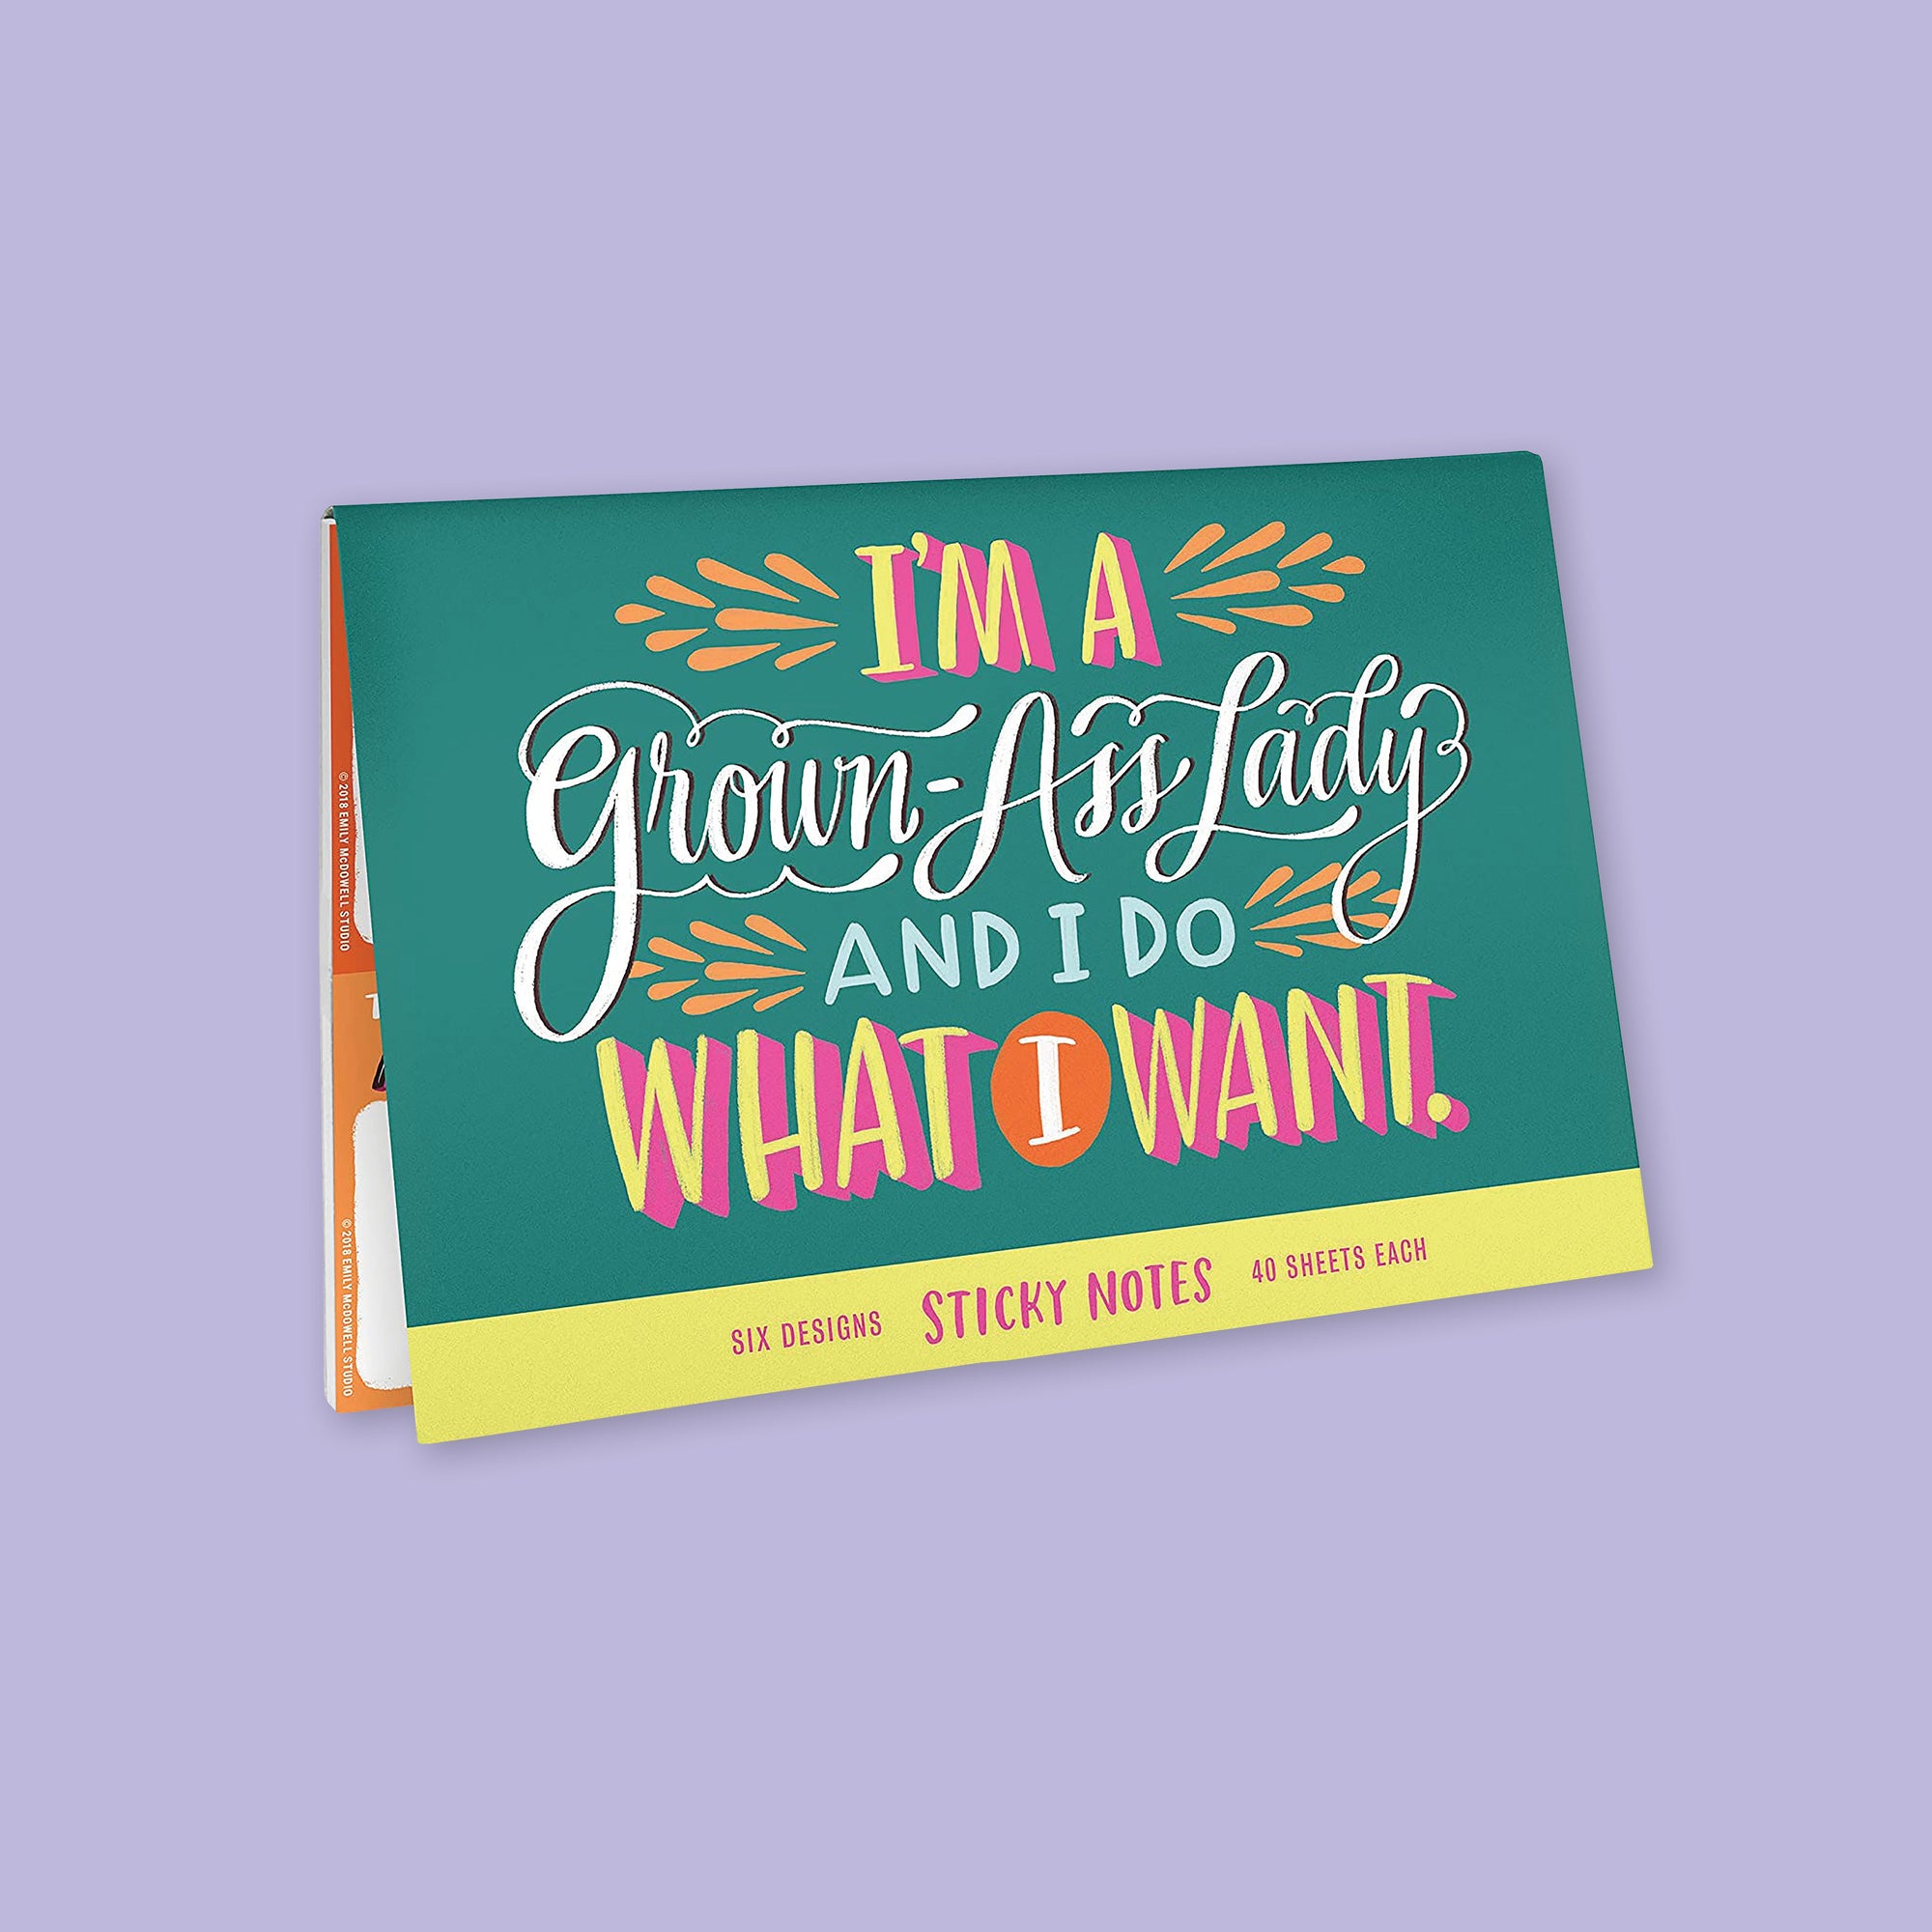 On a lavender background sits a package. The front of this sticky notes package is green with colorful writing on it. It says "I'M A Grown-Ass Lady AND I DO WHAT I WANT." in handwritten lettering. The colors are orange, yellow, hot pink, light blue, and teal. Six designs, 40 sheets each